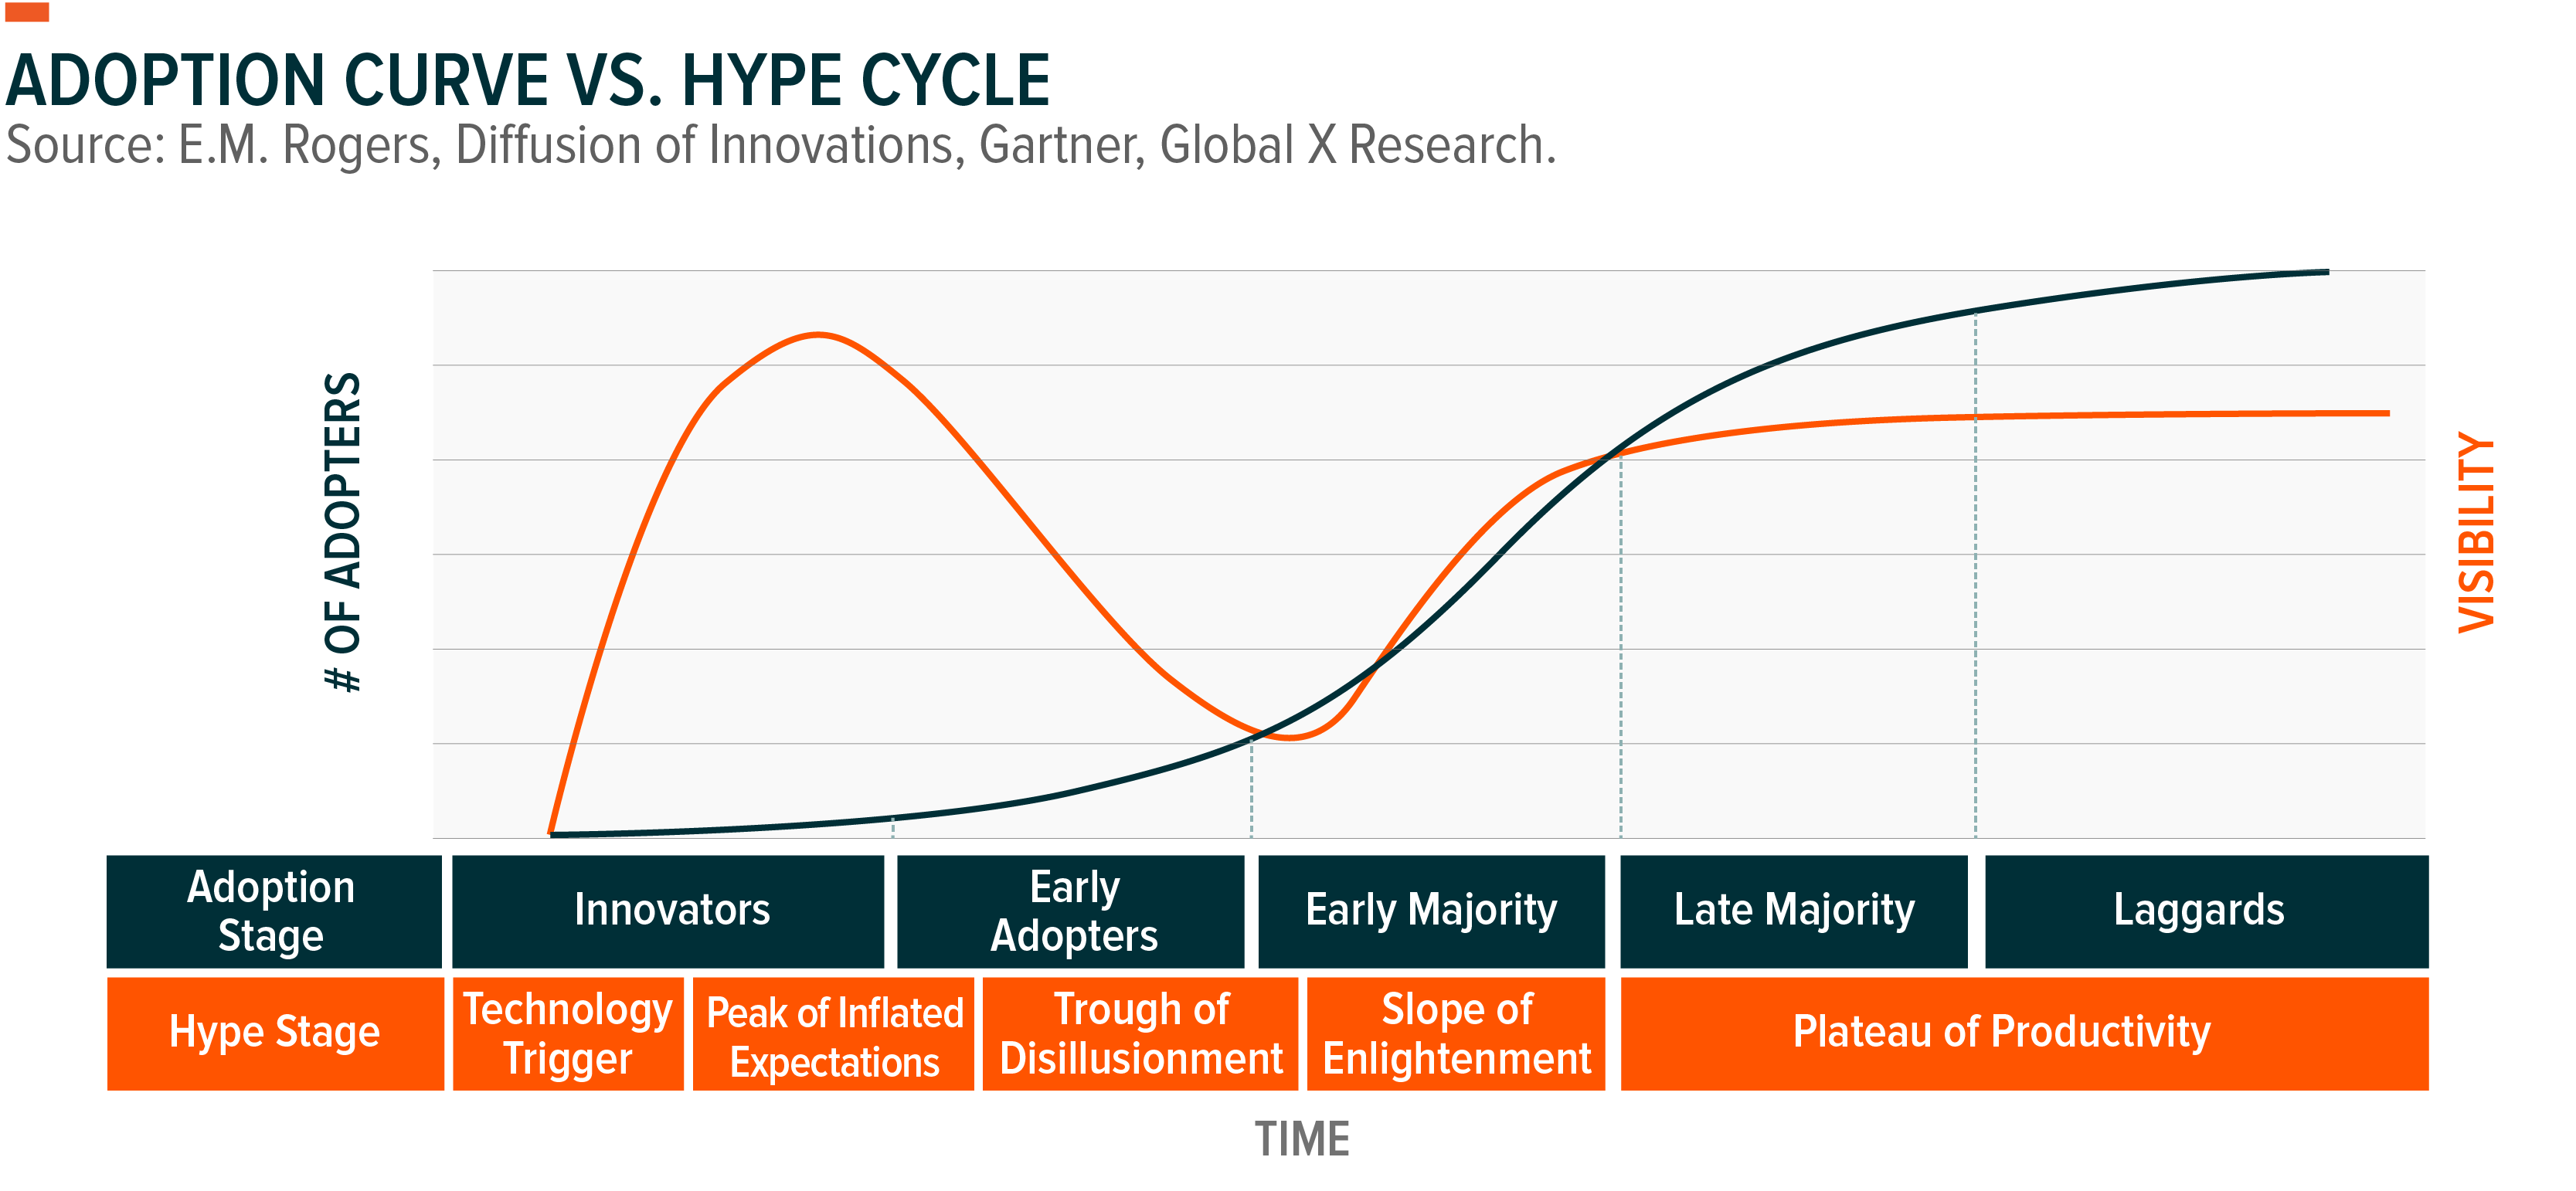 Adoption Curve vs. Hype Cycle